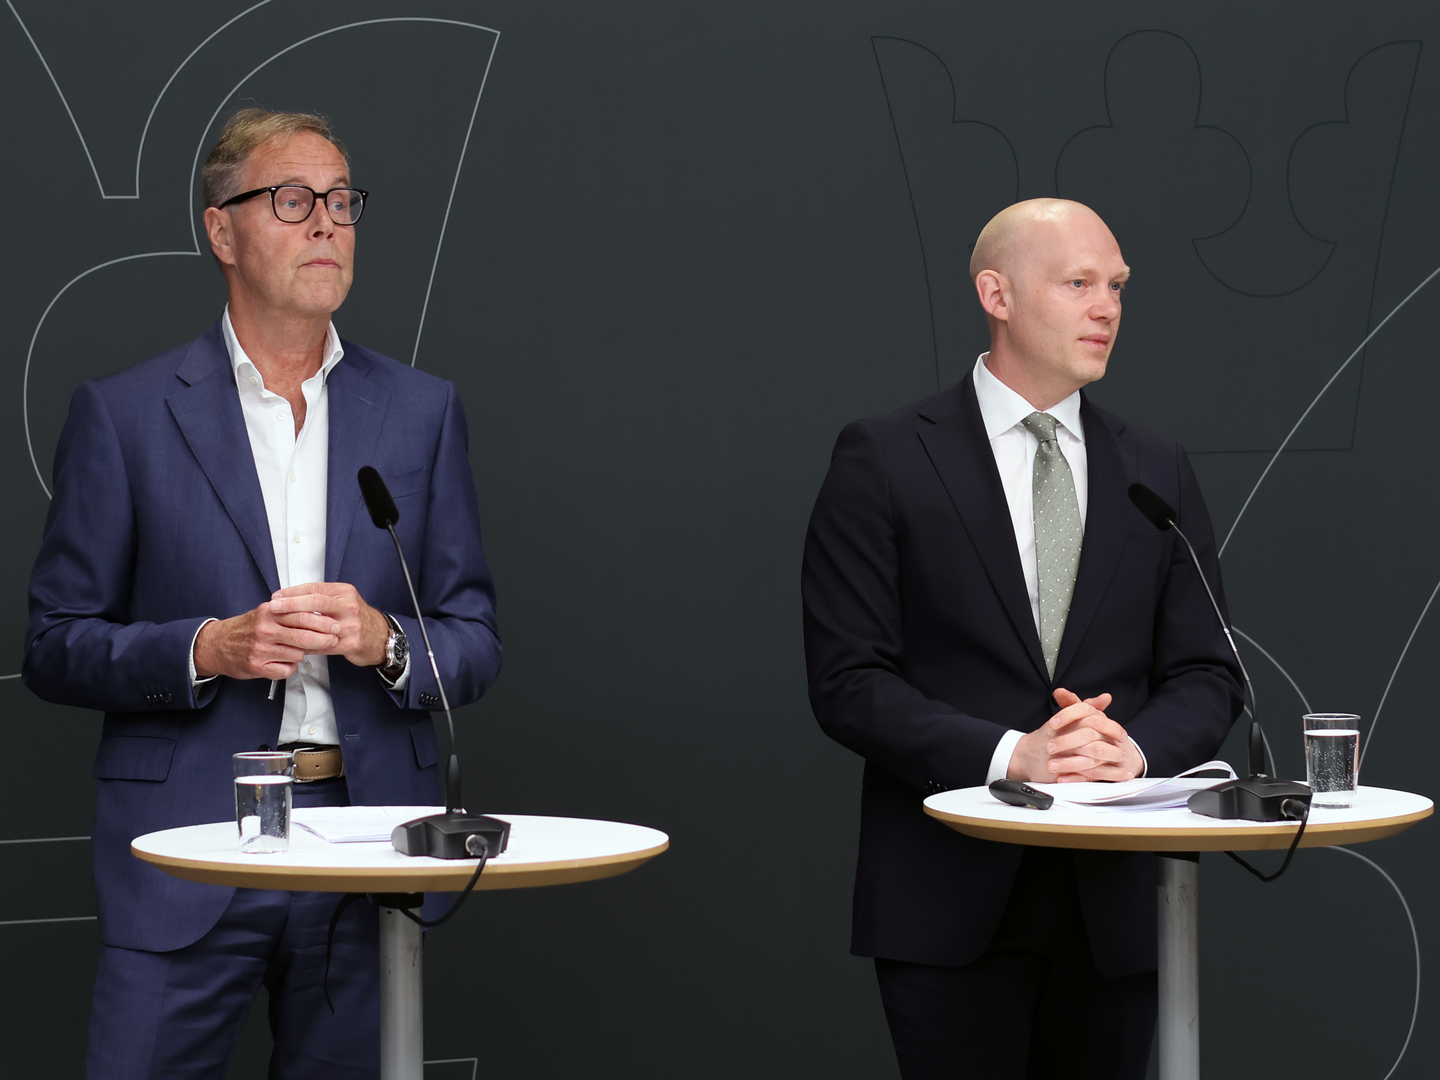 Tord Gransbo (left) and government minister Niklas Wykman at Monday's press briefing on the AP buffer funds. | Foto: Regeringskansliet / PR